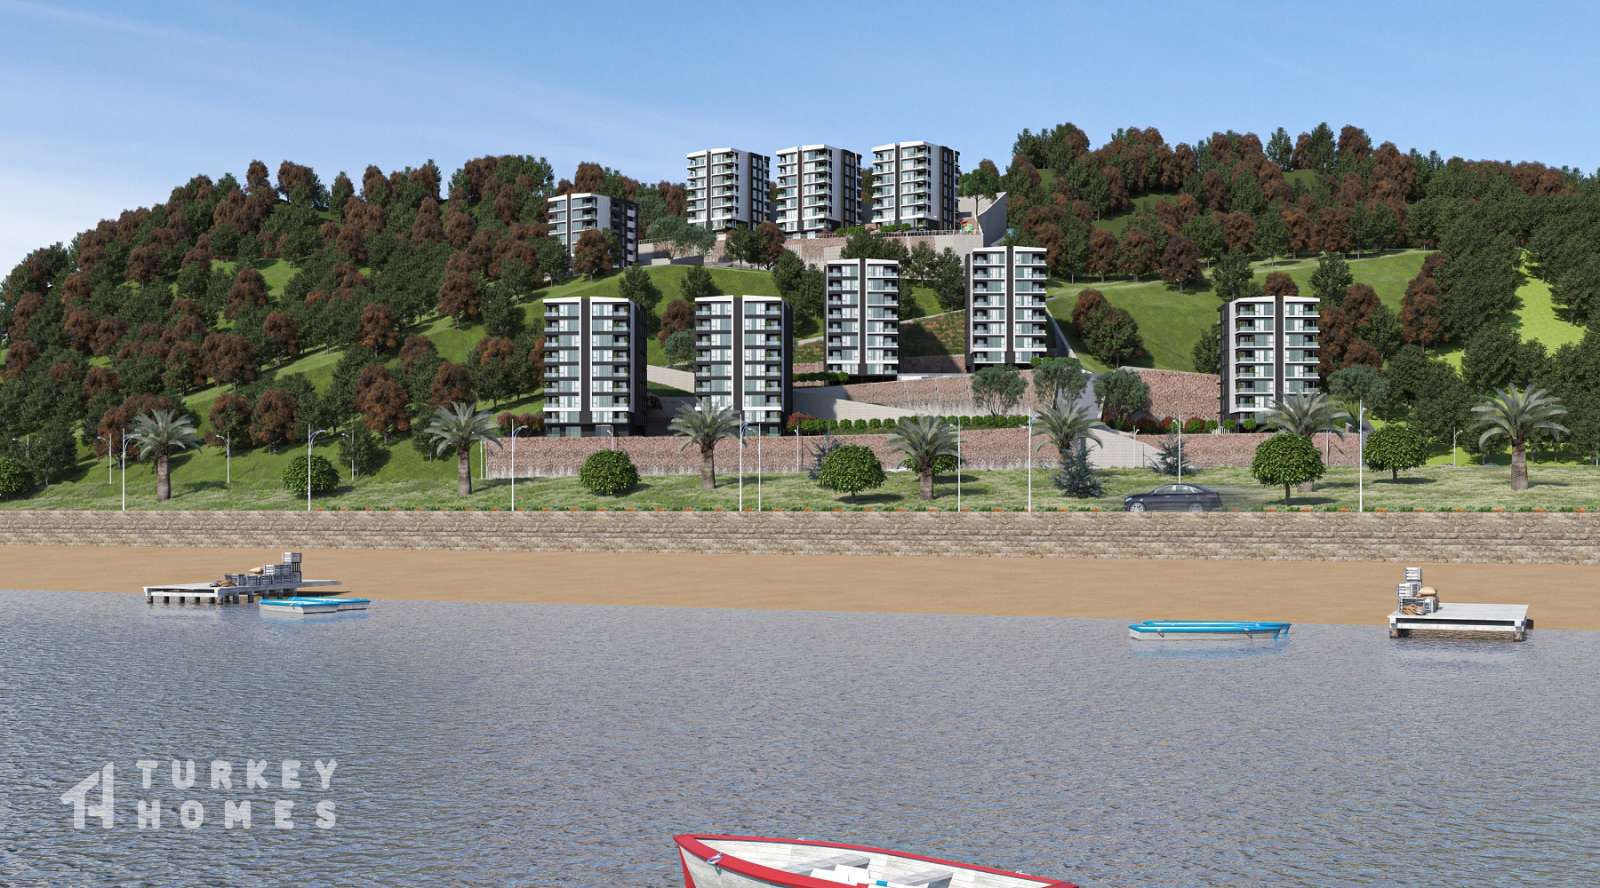 Affordable Sea View Trabzon Apartments - Very close to the beach